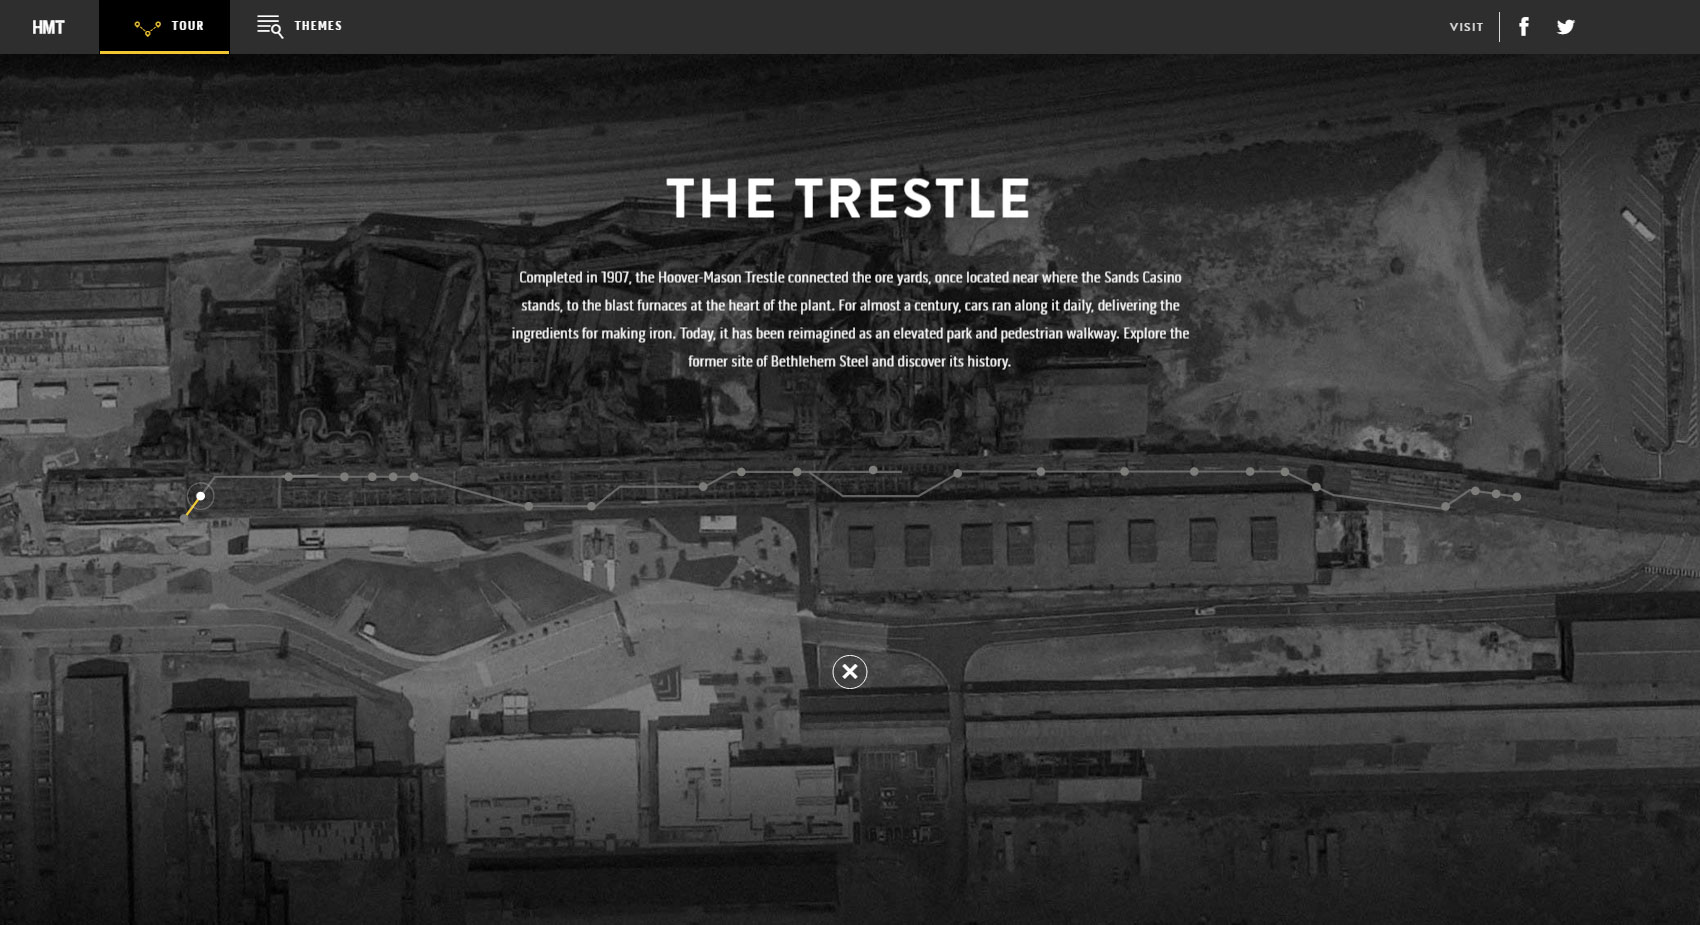 Hoover-Mason Trestle - Website of the Day